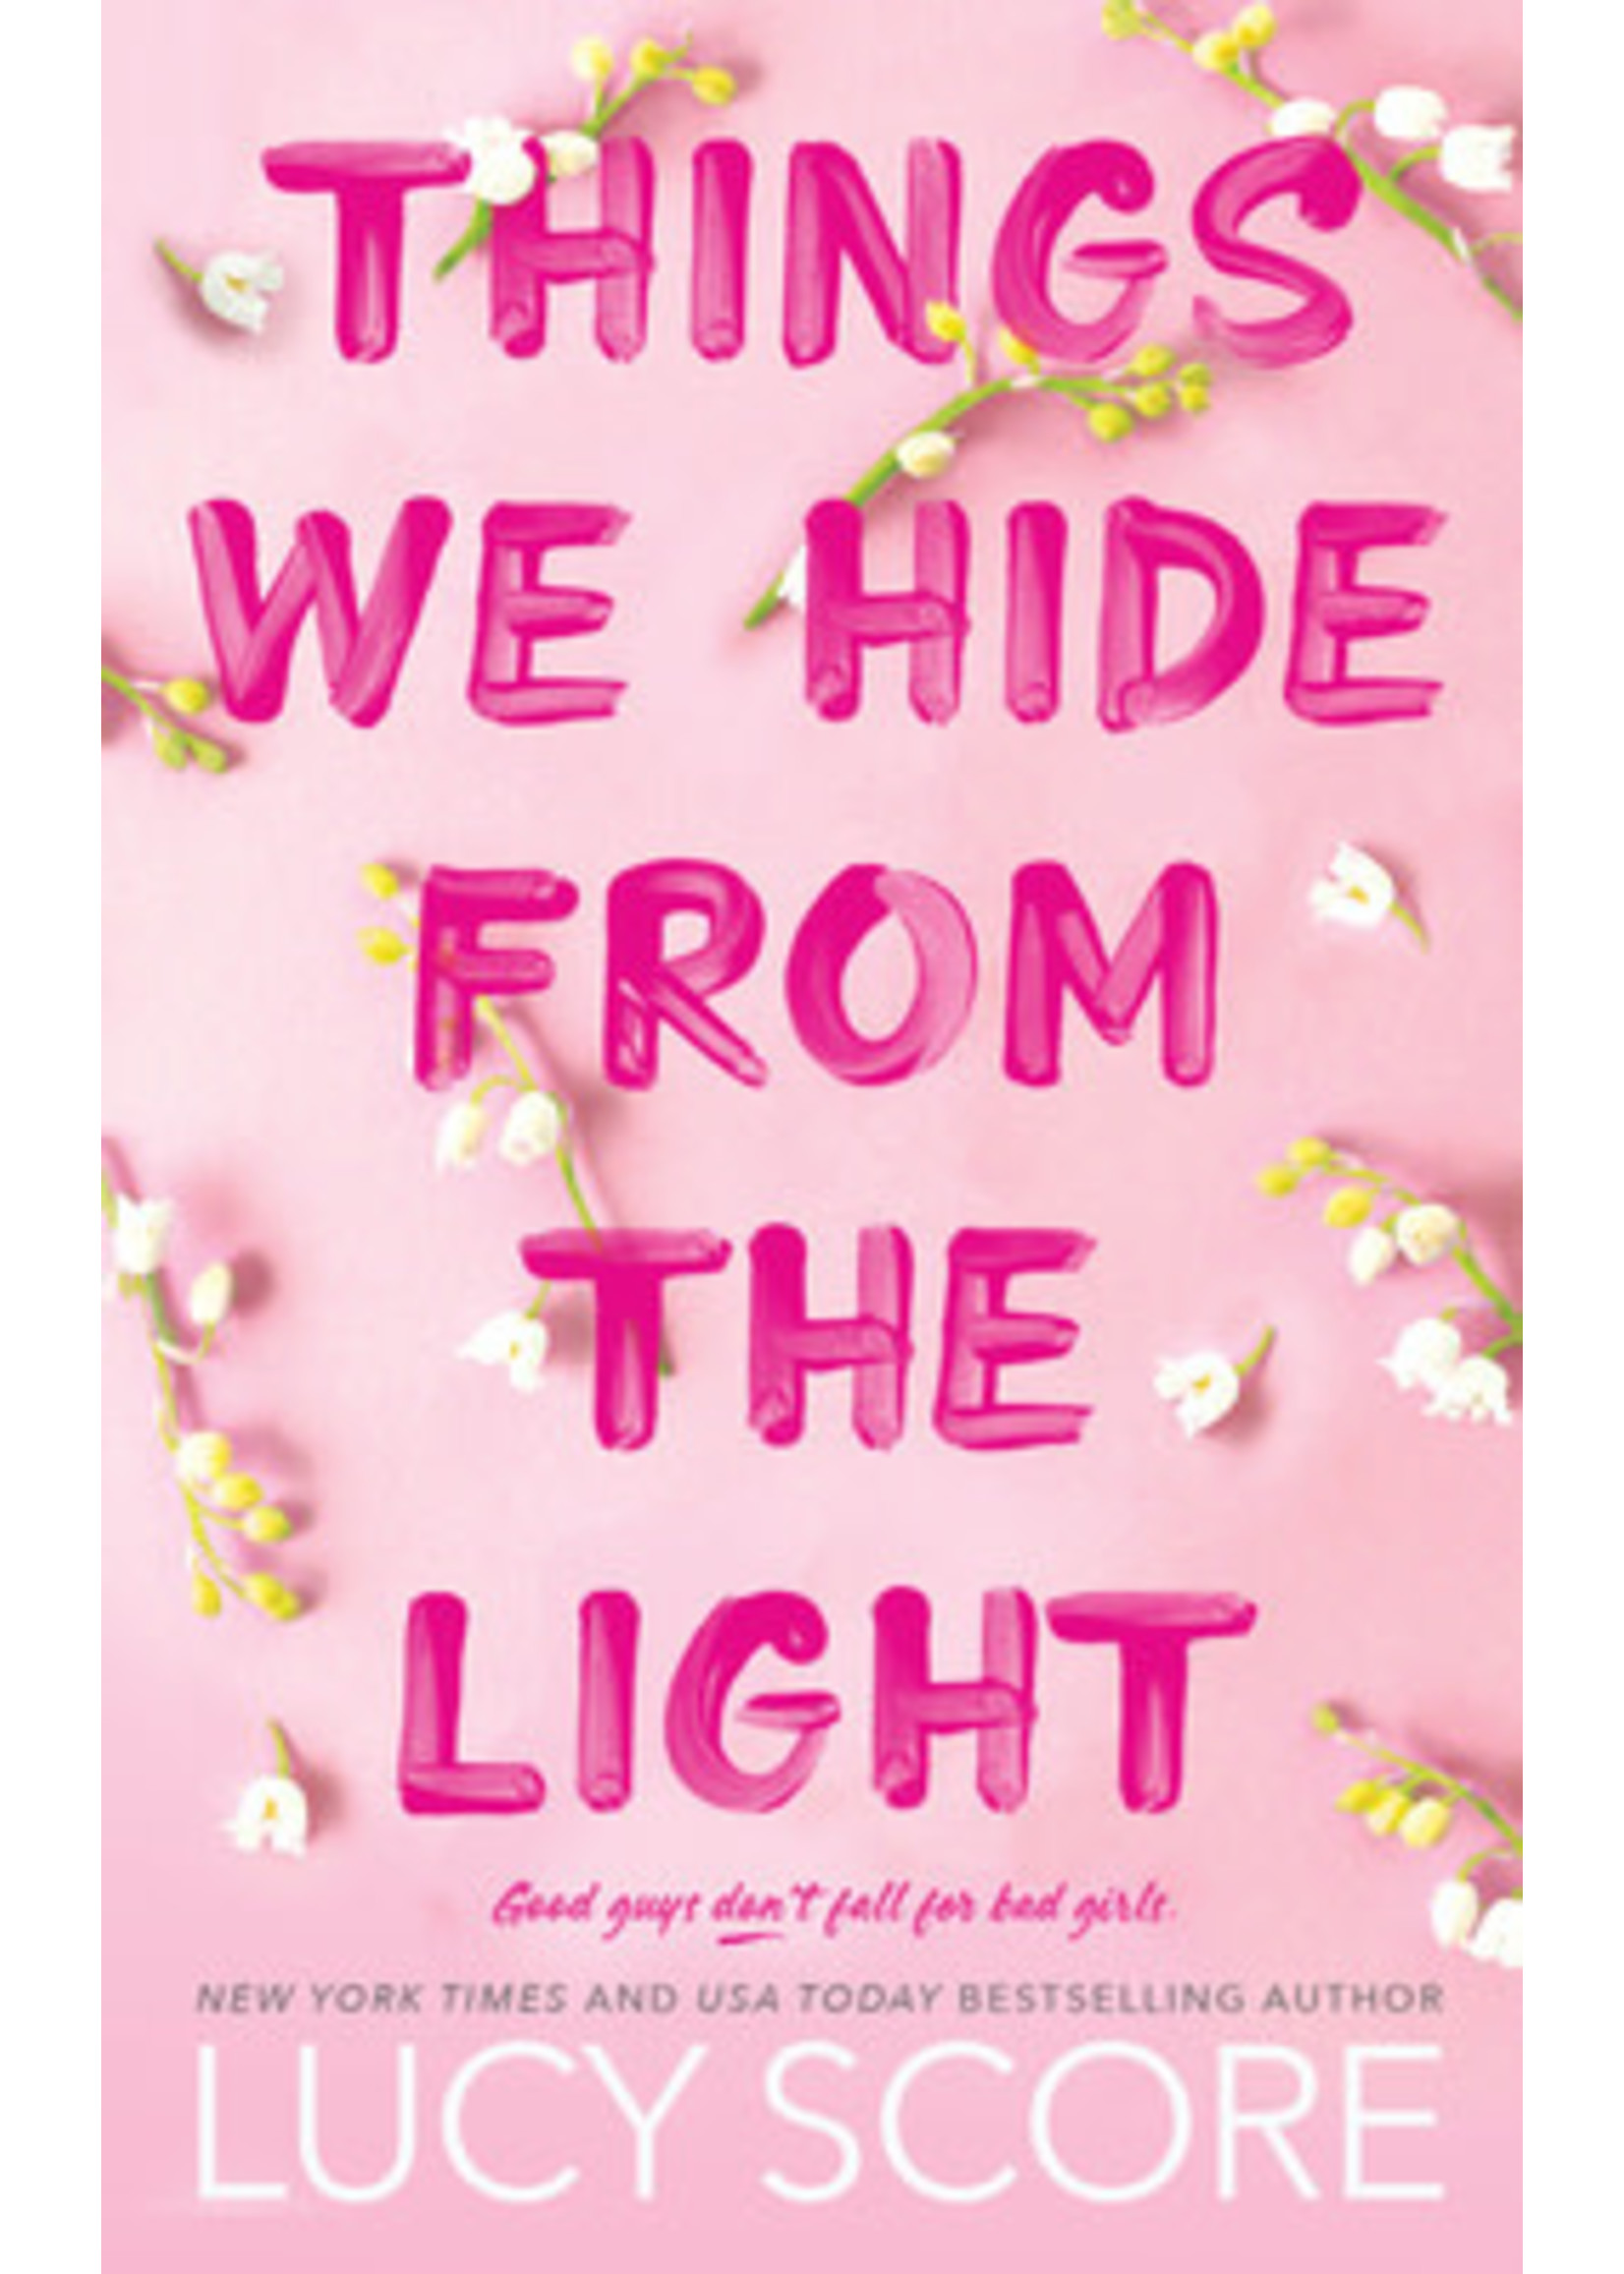 Things We Hide From the Light (Knockemout #2) by Lucy Score